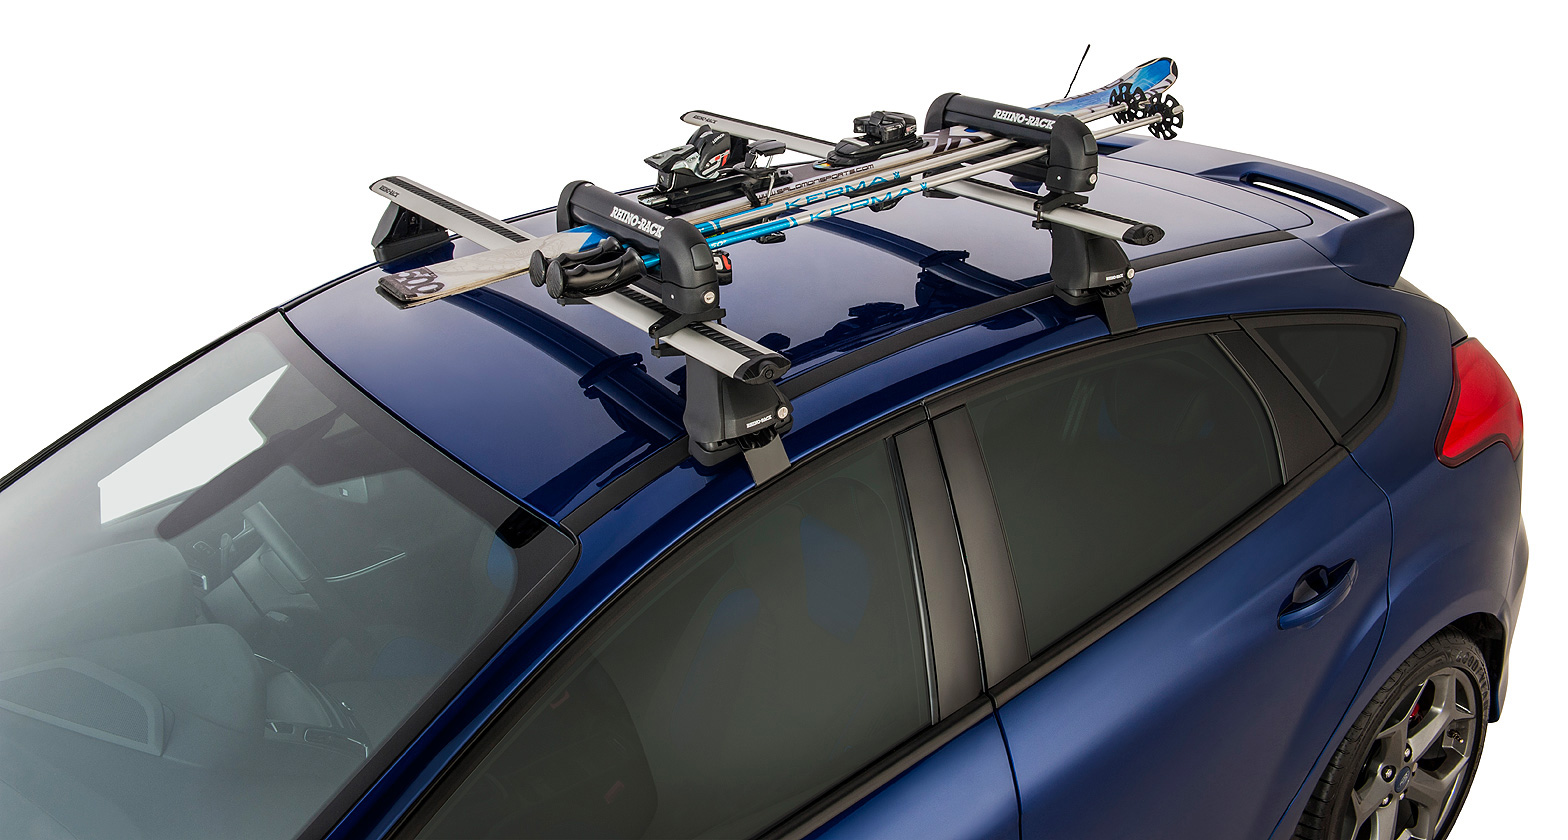 Rhino-Rack Ski And Snowboard Carrier - 2 Skis Or 2 Snowboards